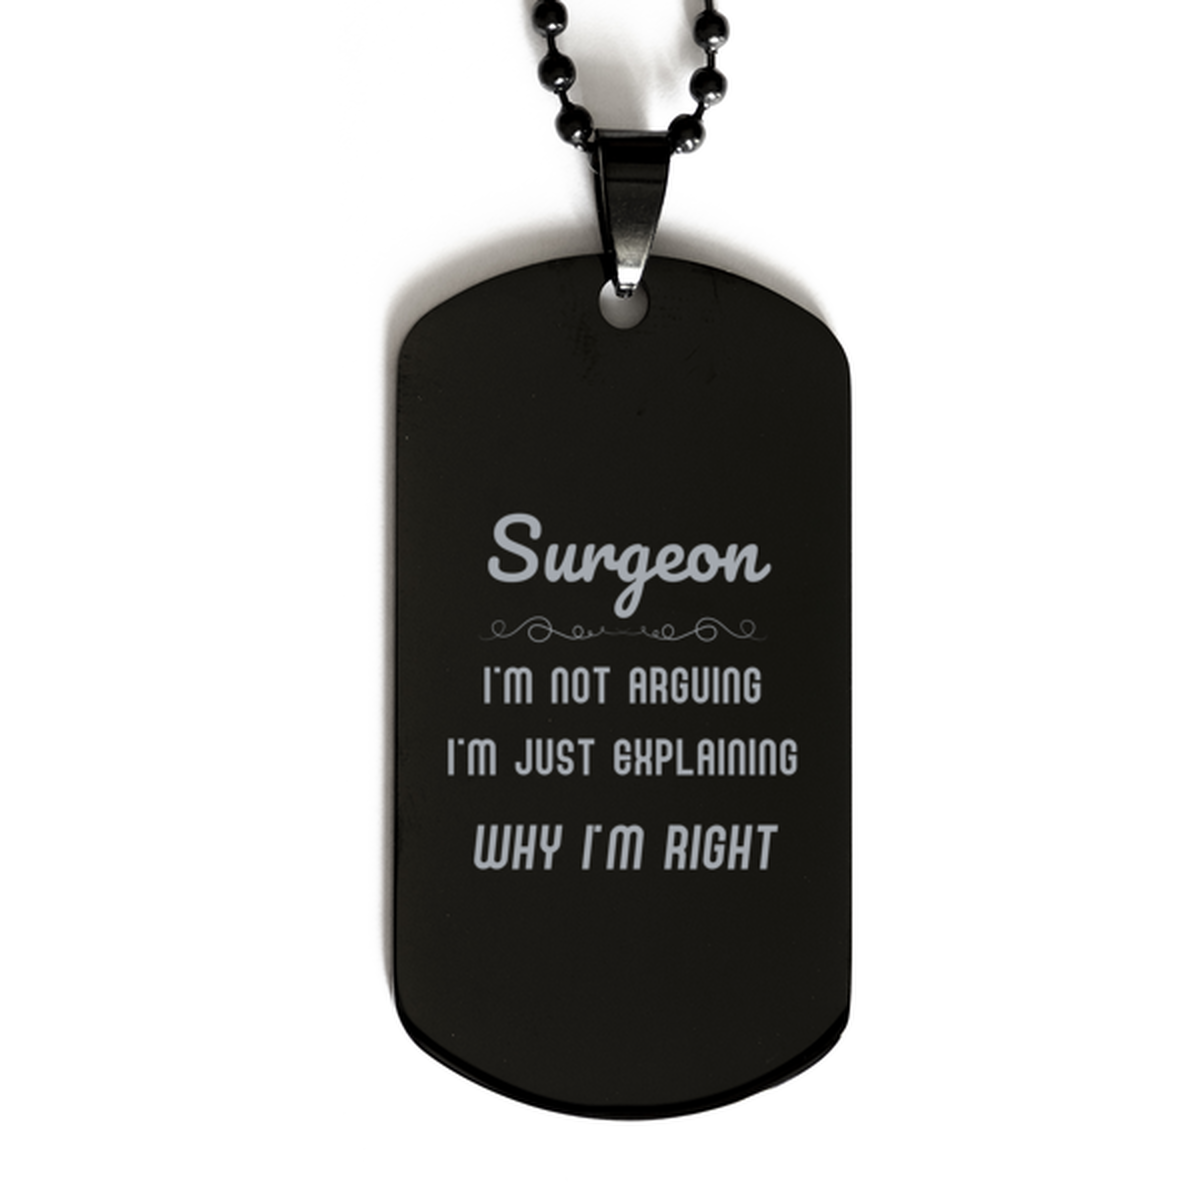 Surgeon I'm not Arguing. I'm Just Explaining Why I'm RIGHT Black Dog Tag, Funny Saying Quote Surgeon Gifts For Surgeon Graduation Birthday Christmas Gifts for Men Women Coworker